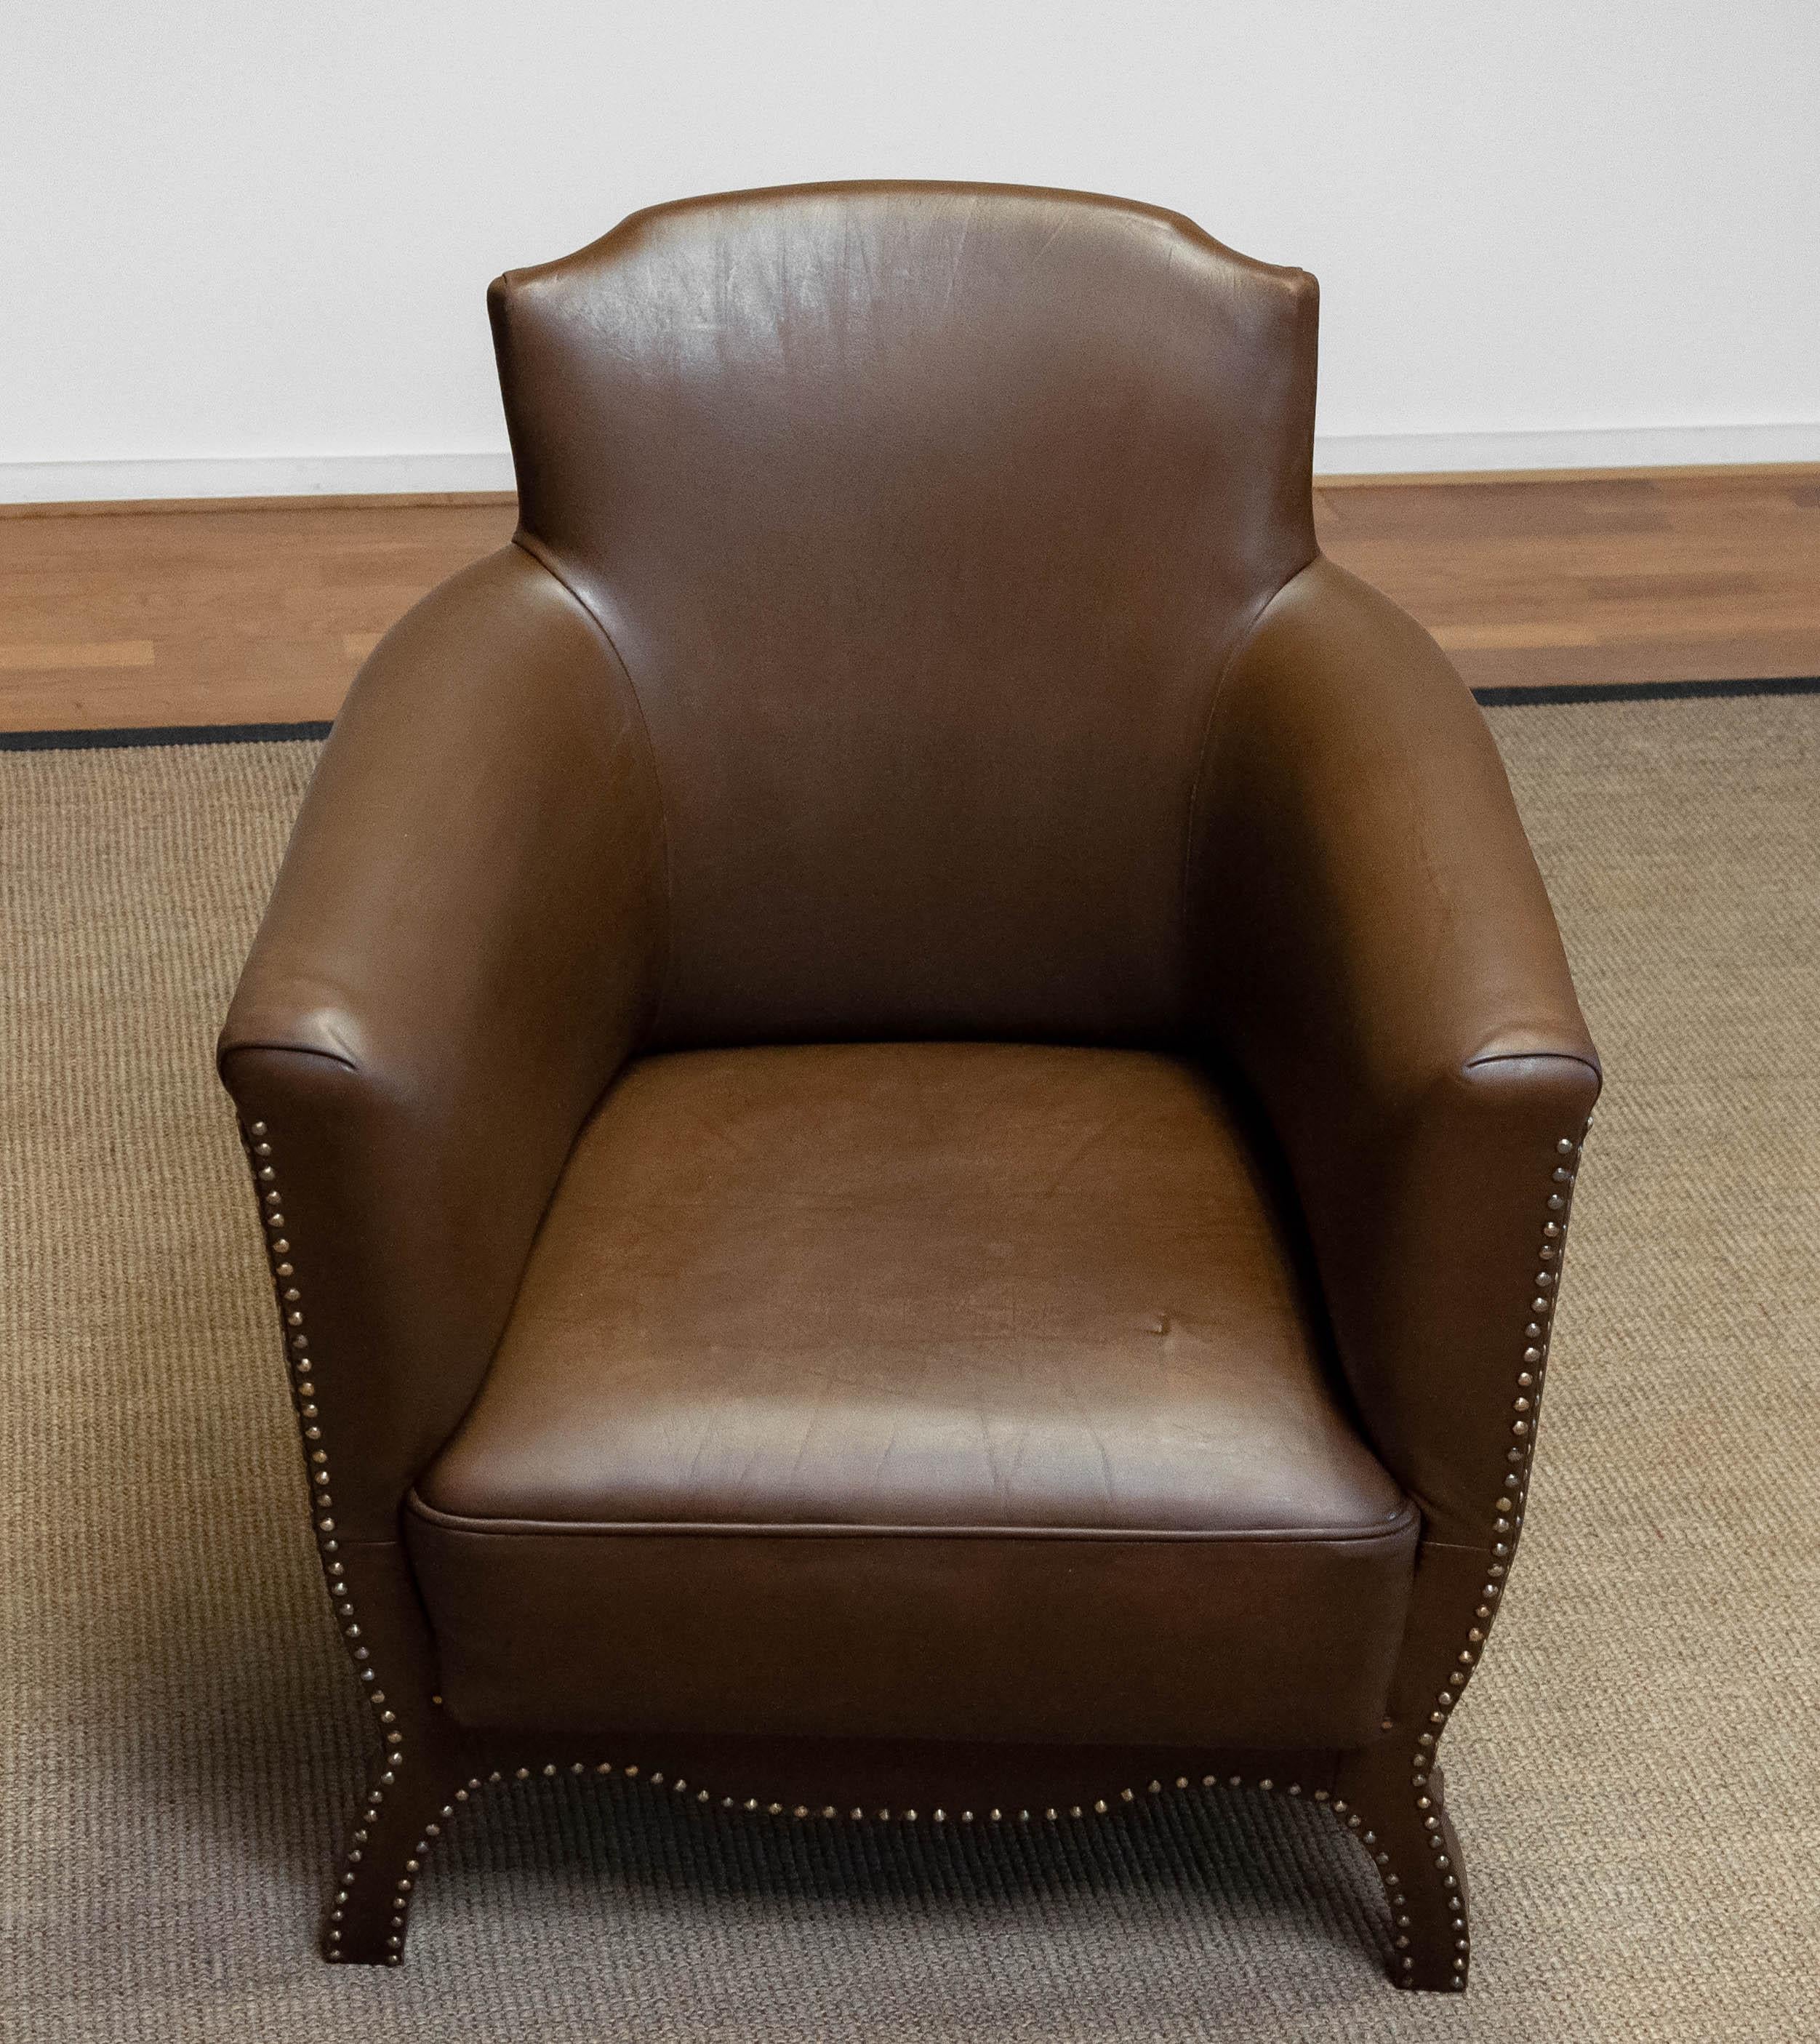 1930s Swedish Tan / Brown Nailed Leather Lounge Chair By Otto Schultz For Boet For Sale 6